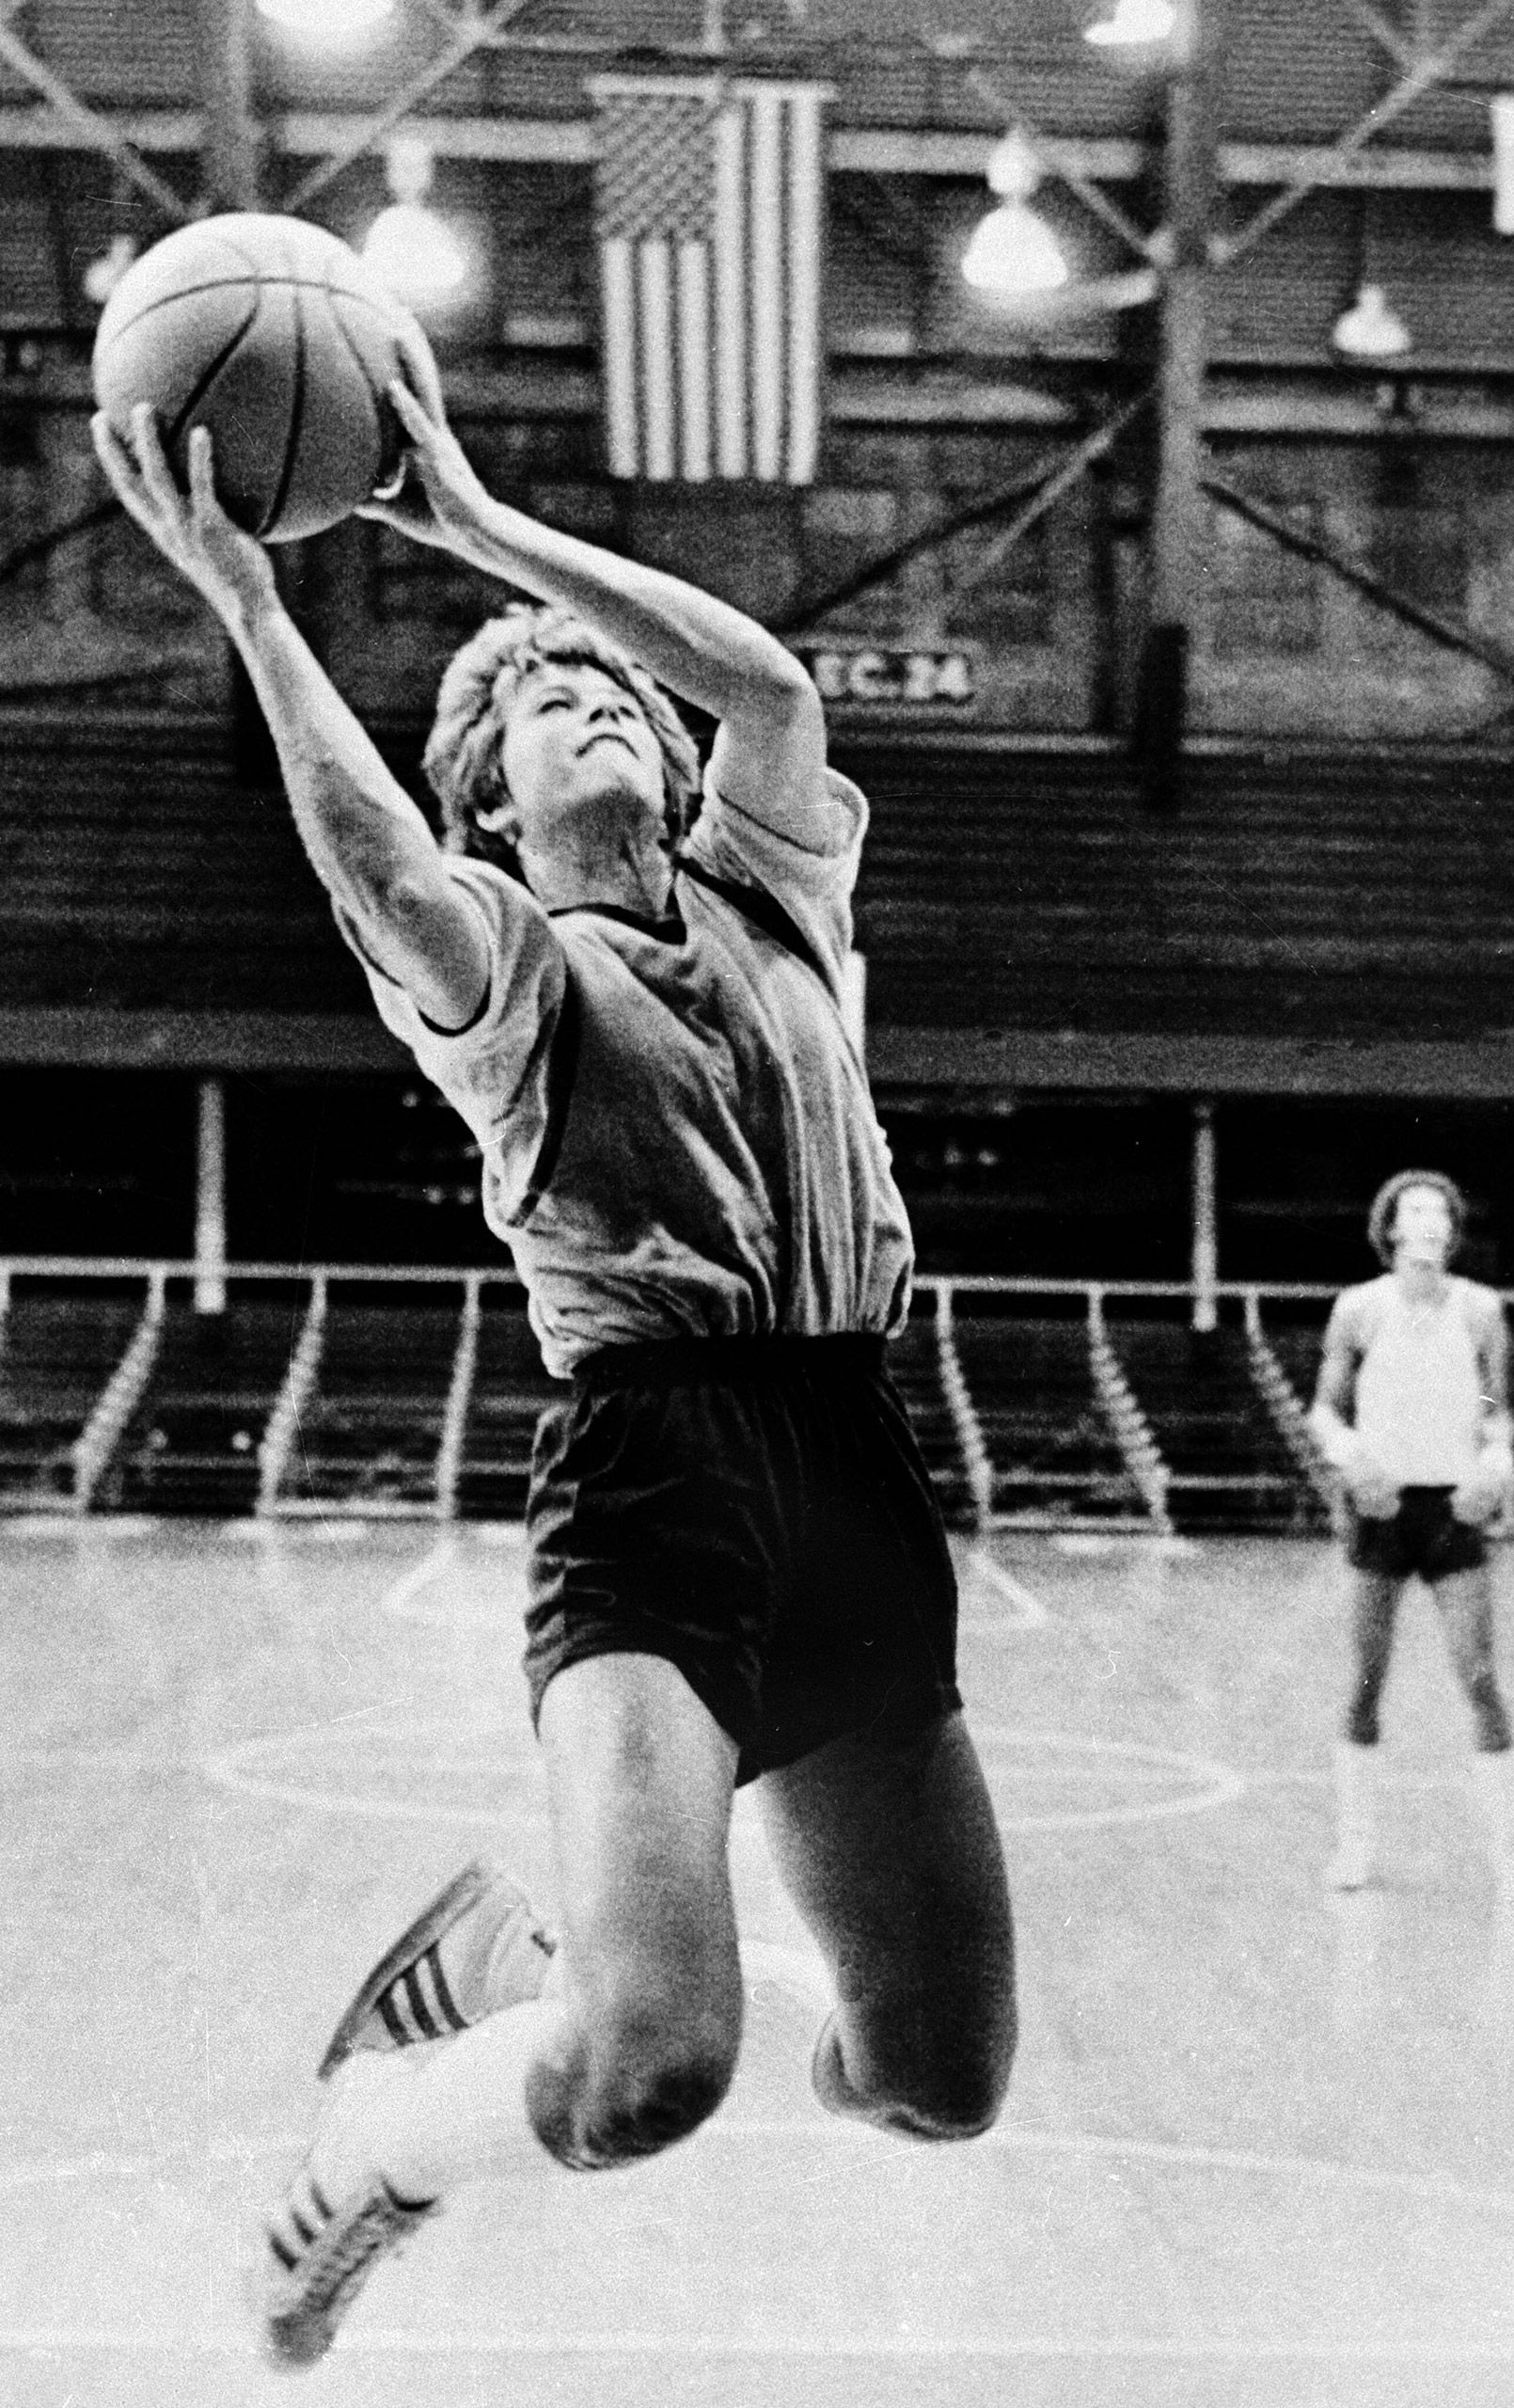 Former UCLA women's All-American Ann Meyers drives in during practice at the NBA rookie camp for the Indiana Pacers in Indianapolis, Sept. 10, 1979, the year she became the first woman to get a contract in men's pro sports. Though the signing was called a stunt by many, Meyers told TIME that she could  dribble and make plays as well as anybody in the league.